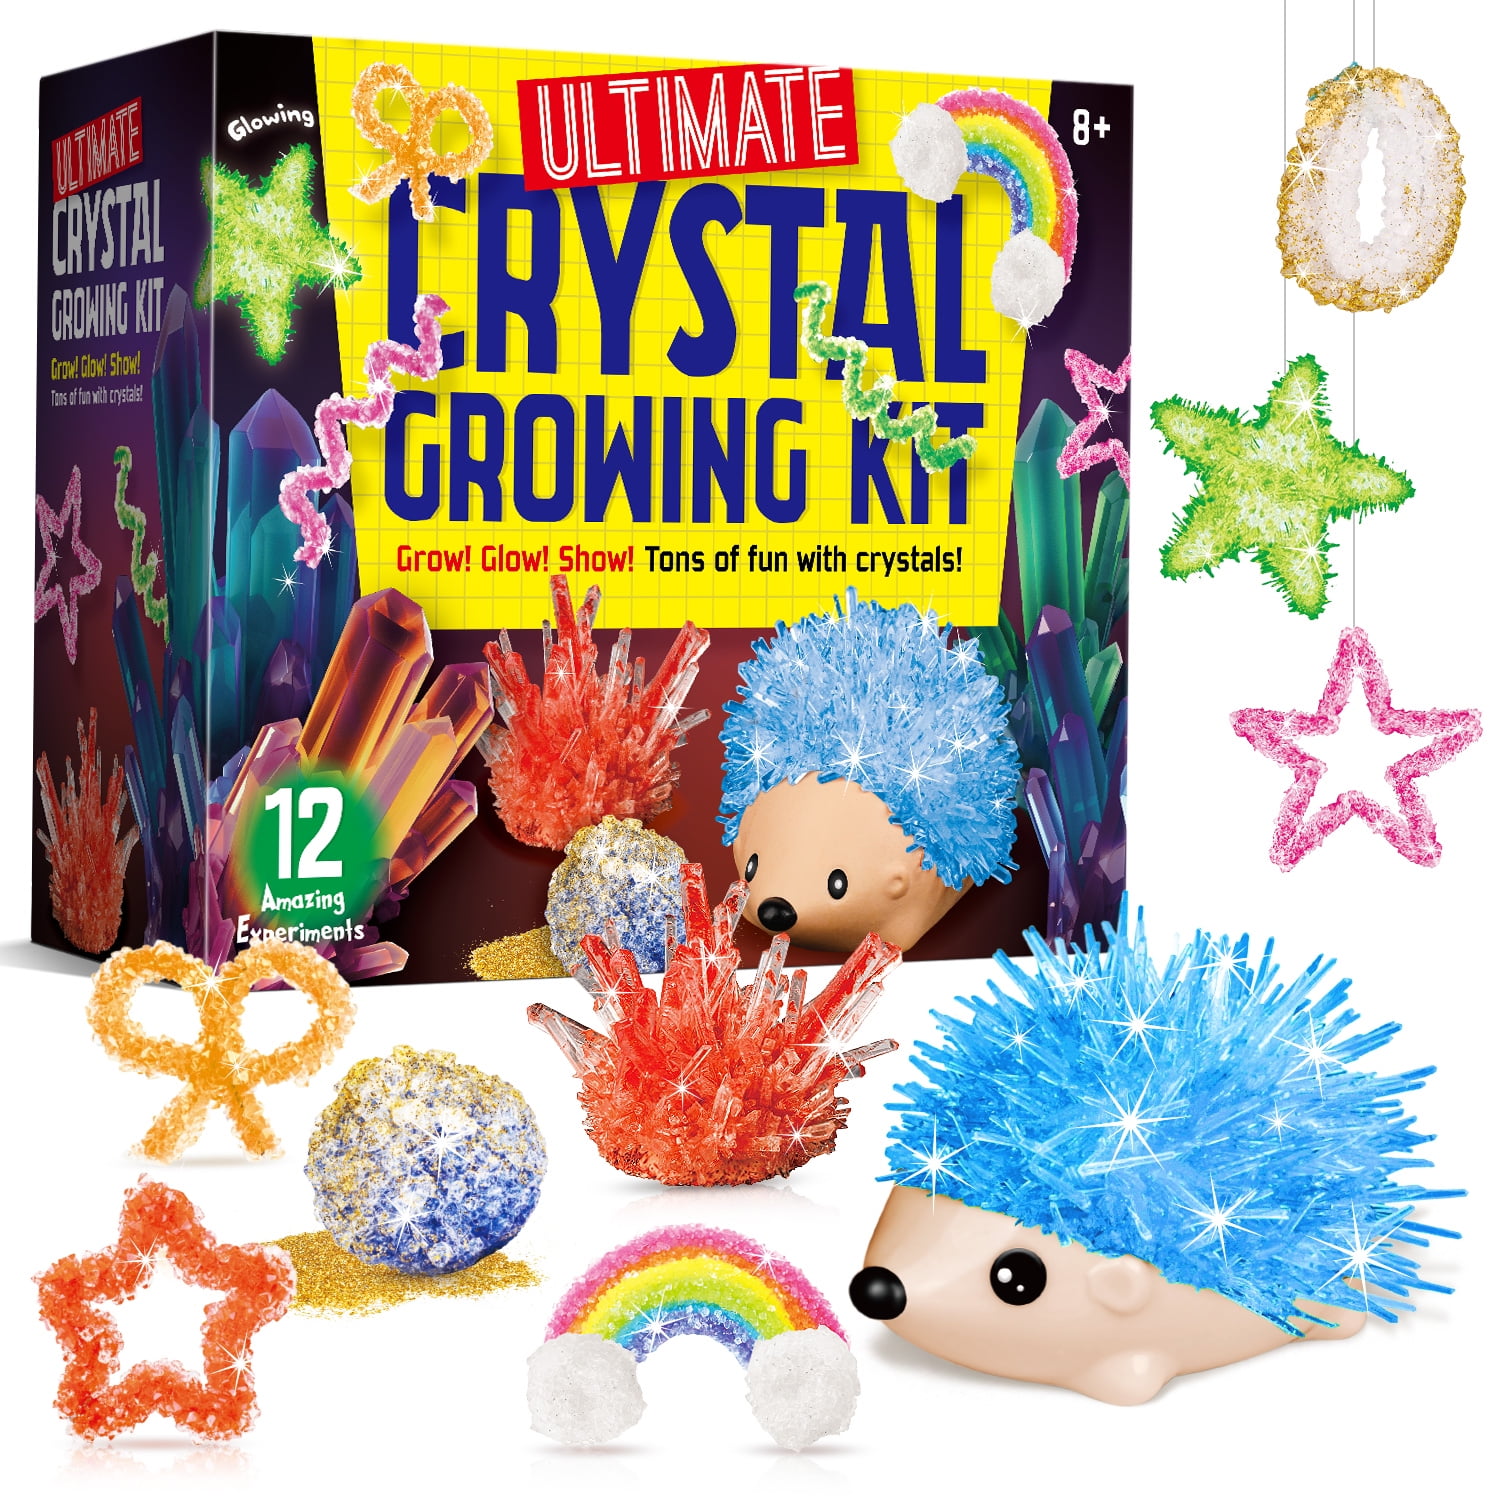 Rock Candy Crystal Growing Experiment Kit